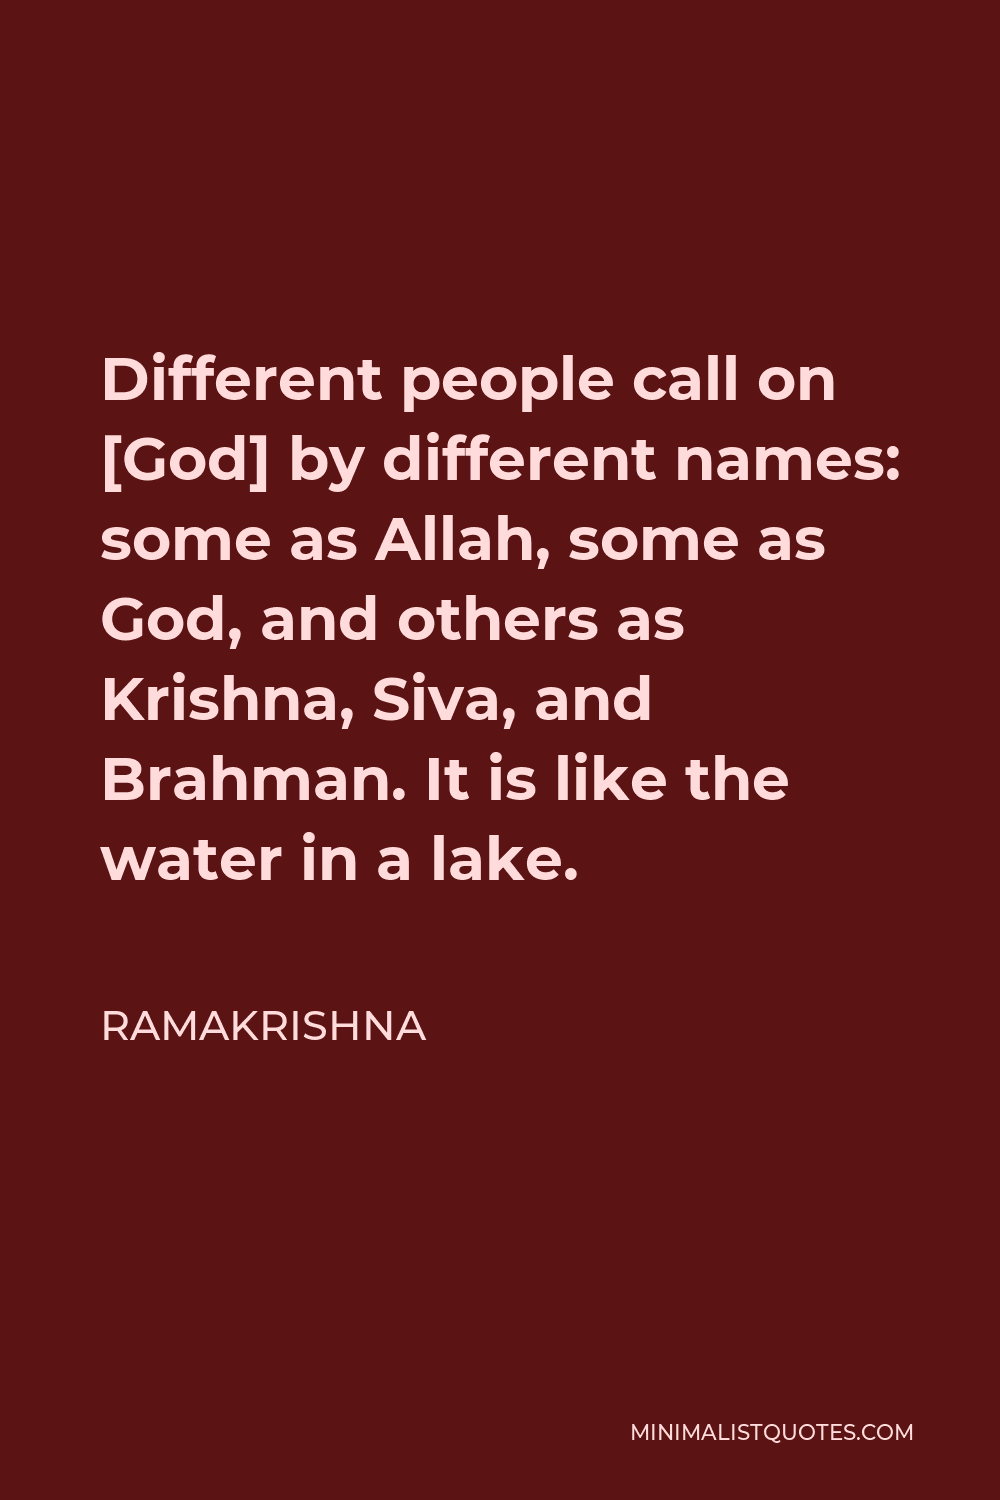 Ramakrishna Quote - Different people call on [God] by different names: some as Allah, some as God, and others as Krishna, Siva, and Brahman. It is like the water in a lake.